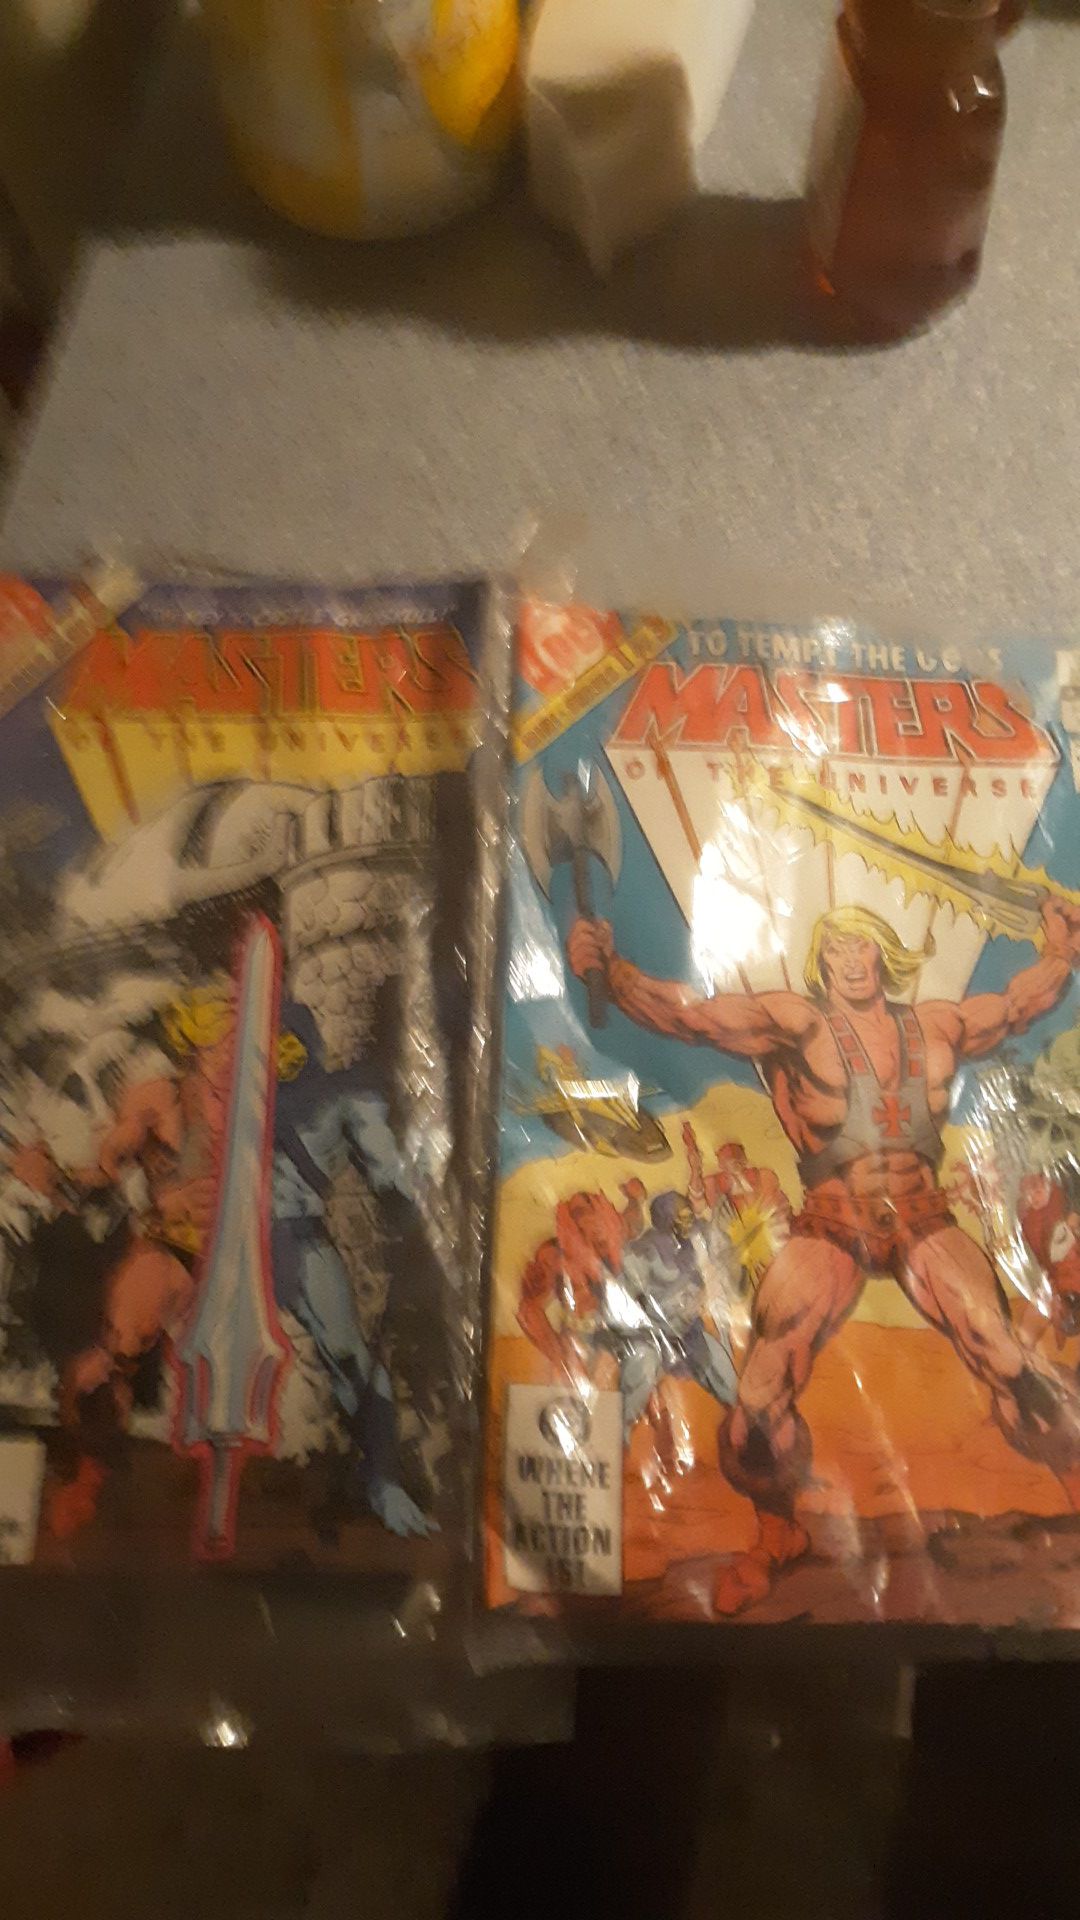 Master of universe early 80s comics